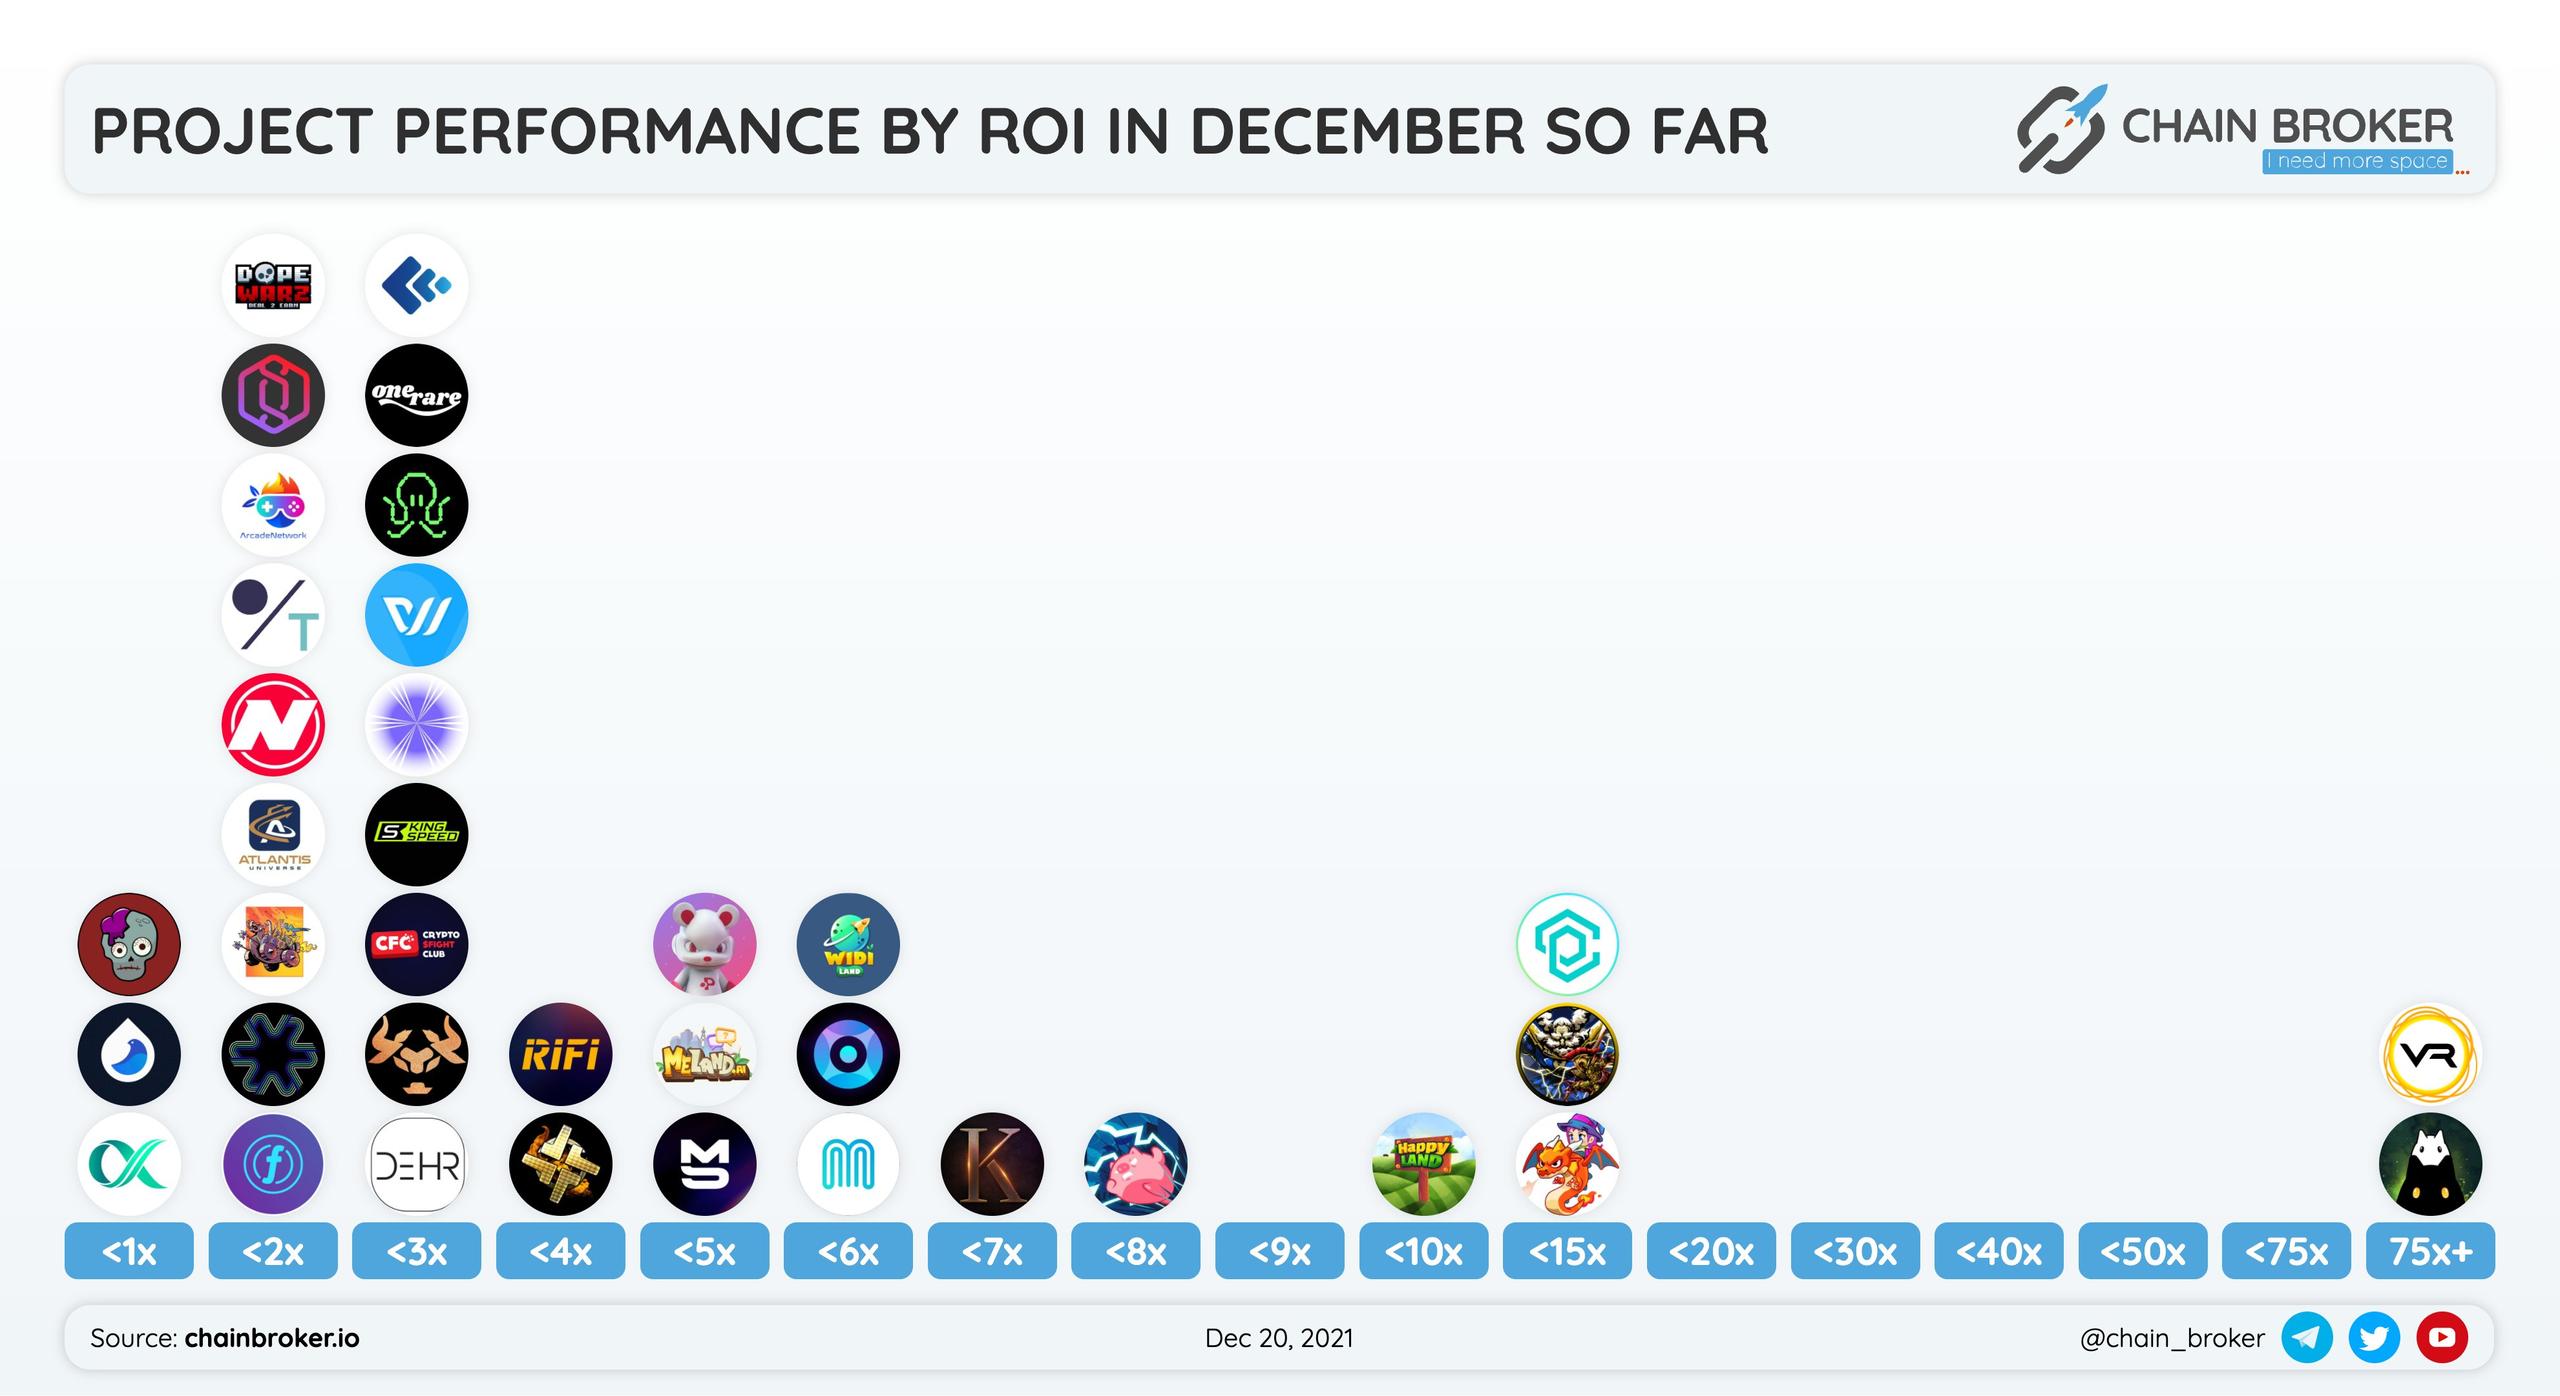 Project Performance by ROI listed in December so far